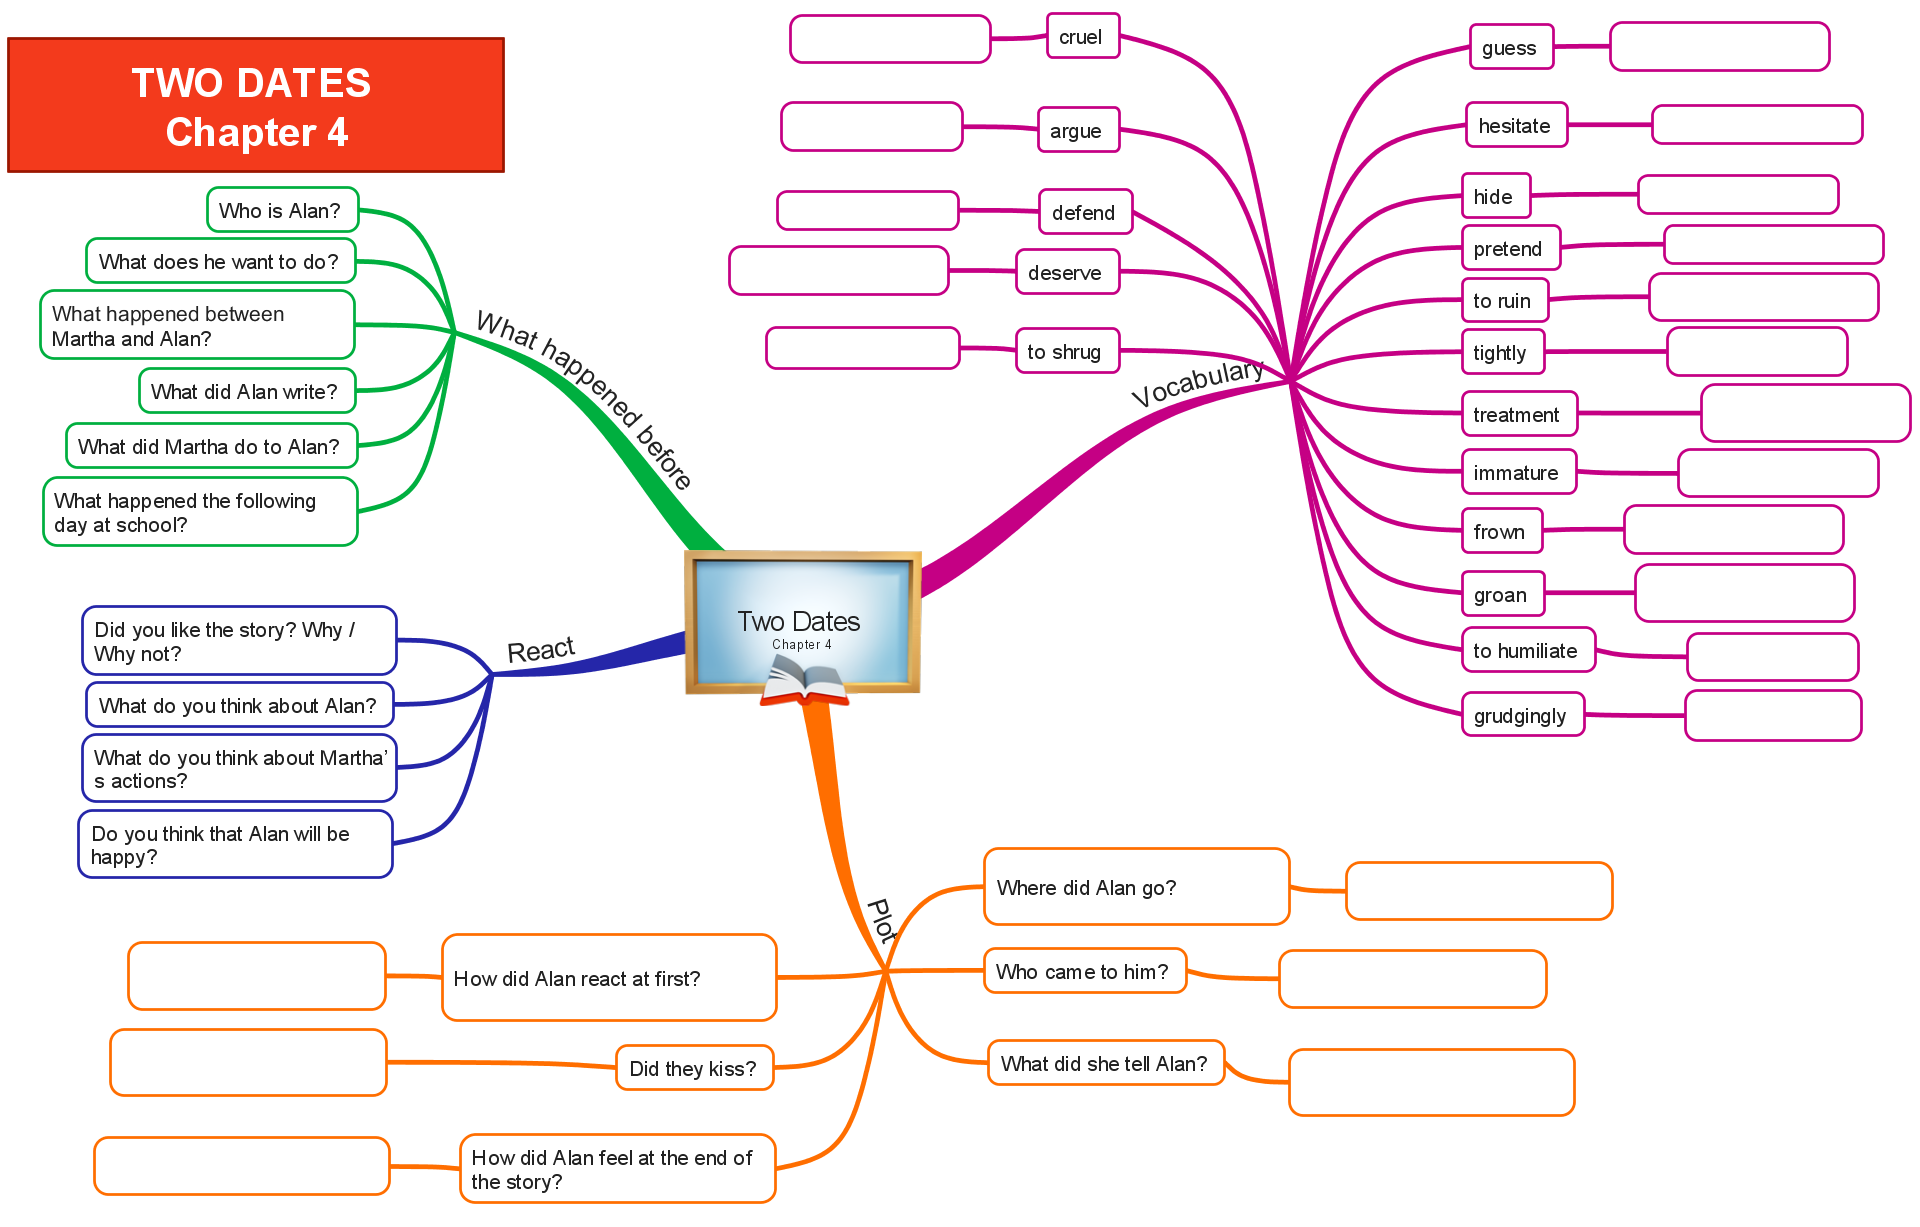 Two Dates story Chapter 4 mind map